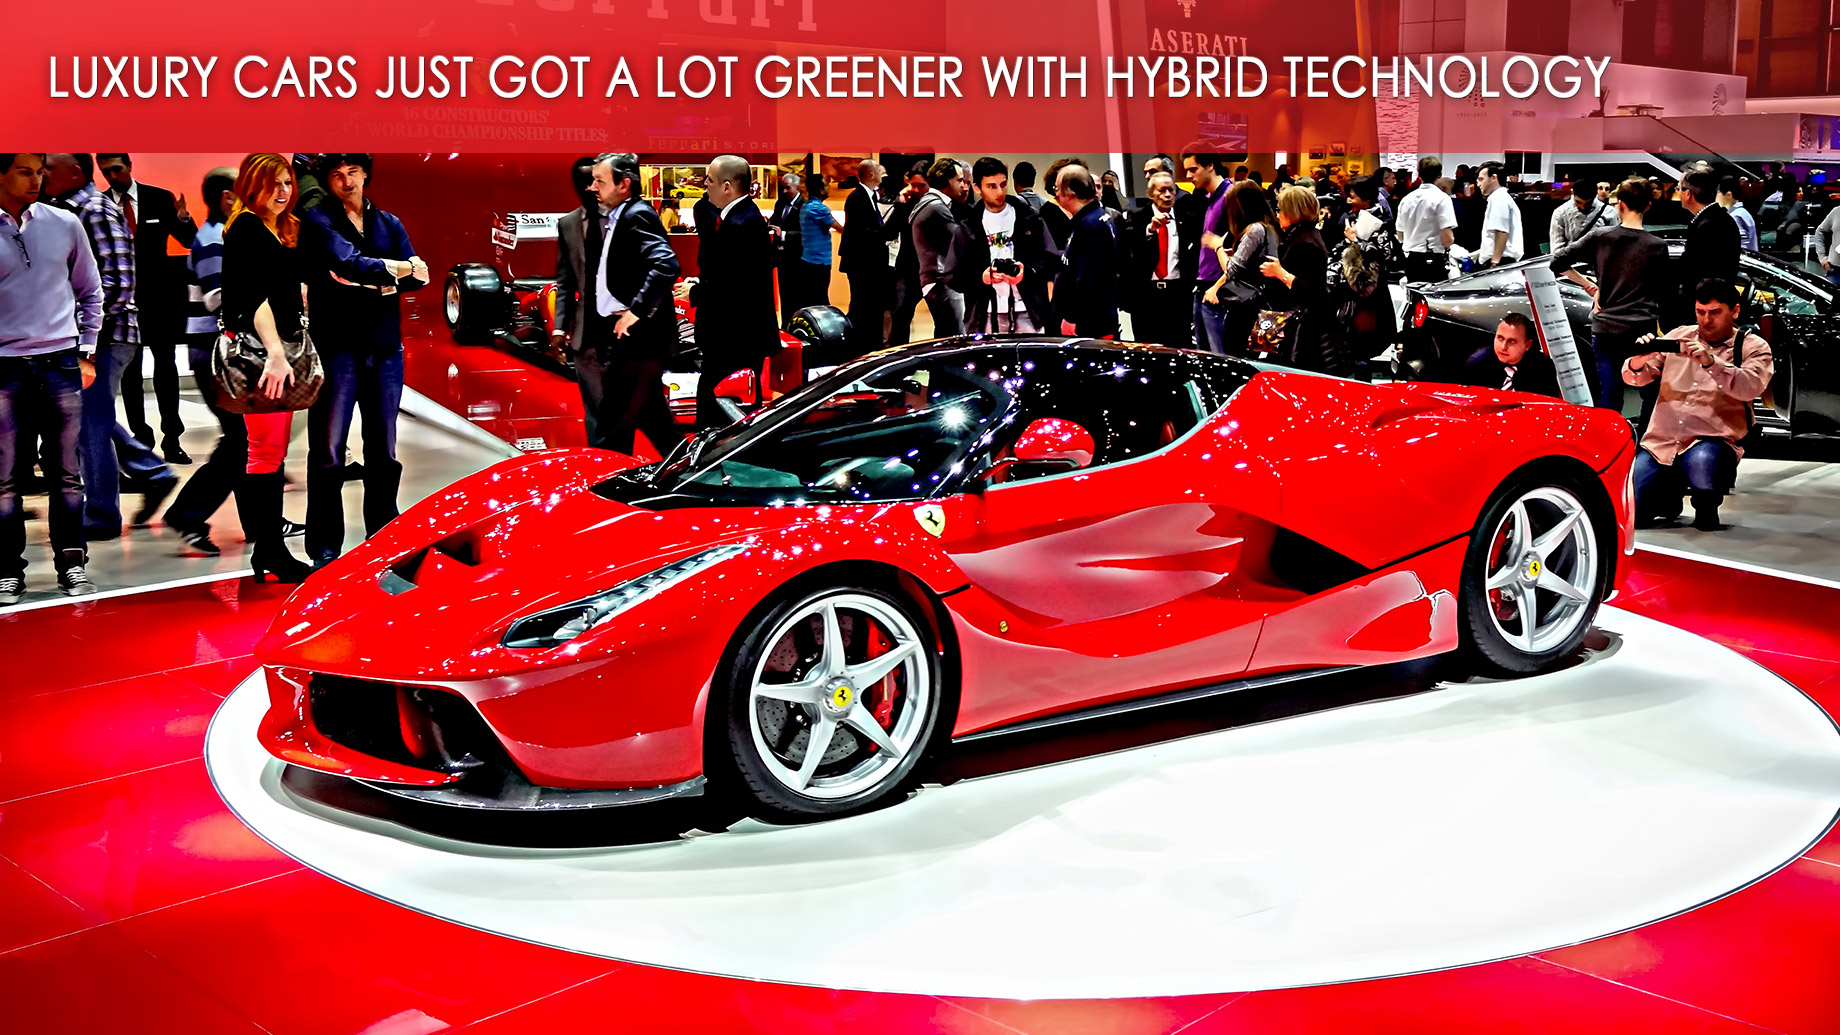 Luxury Cars Just Got a Lot Greener with Hybrid Technology at the 2013 Geneva Motor Show